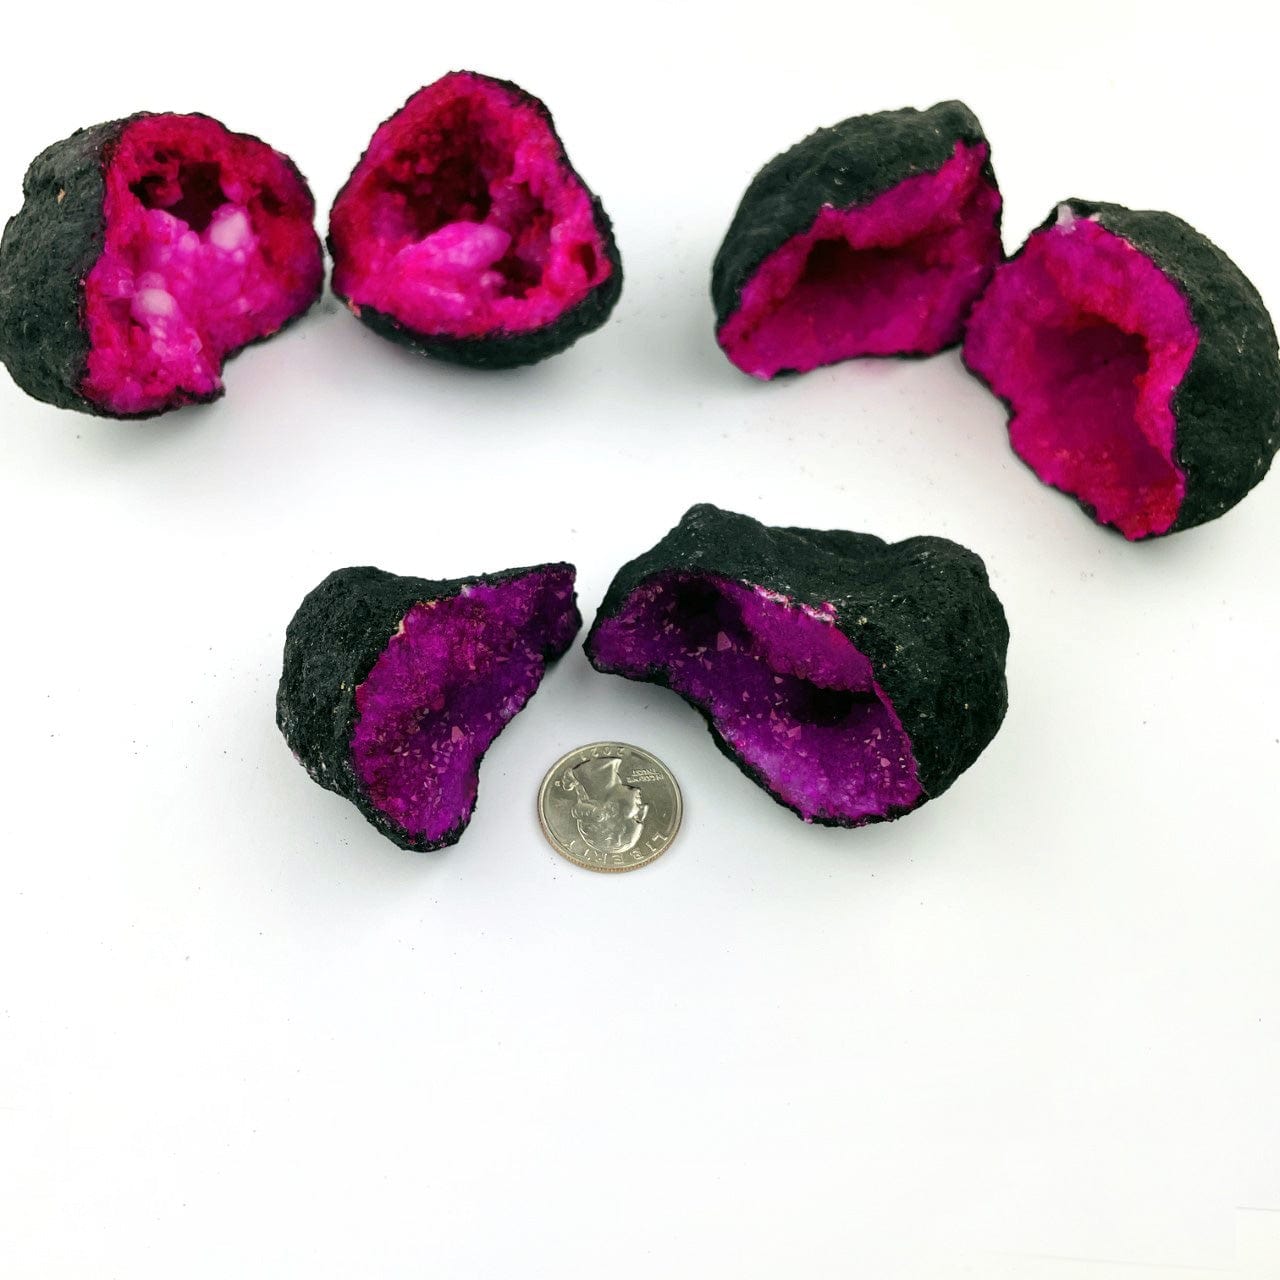 Hot Pink Color Dyed opened Geodes next to a quarter for size reference